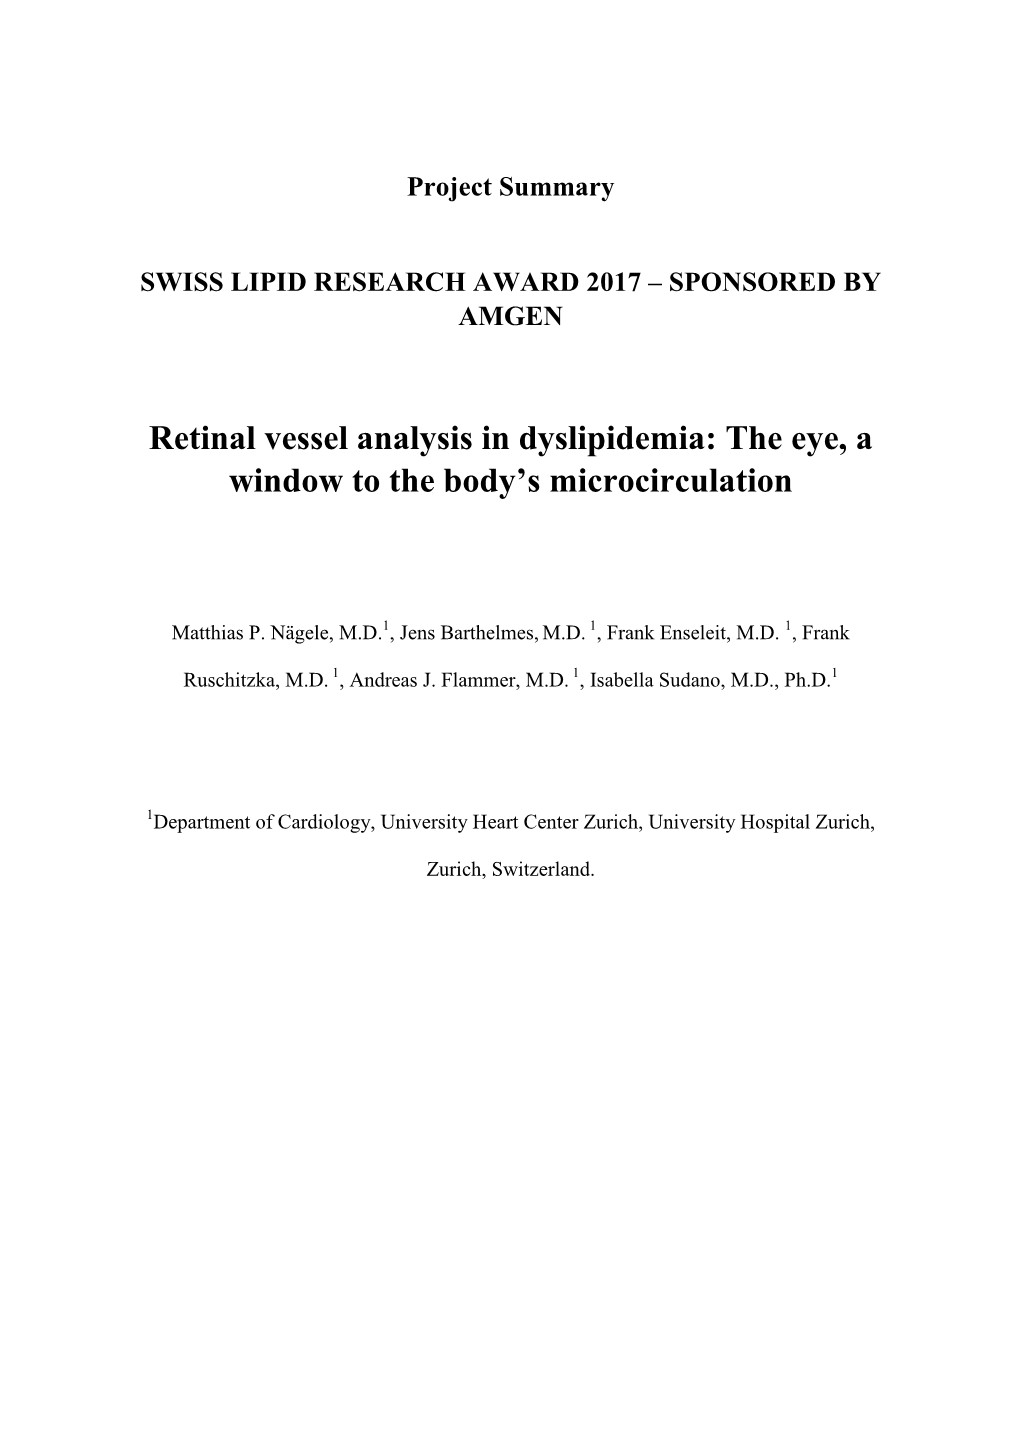 Retinal Vessel Analysis in Dyslipidemia: the Eye, a Window to the Body’S Microcirculation